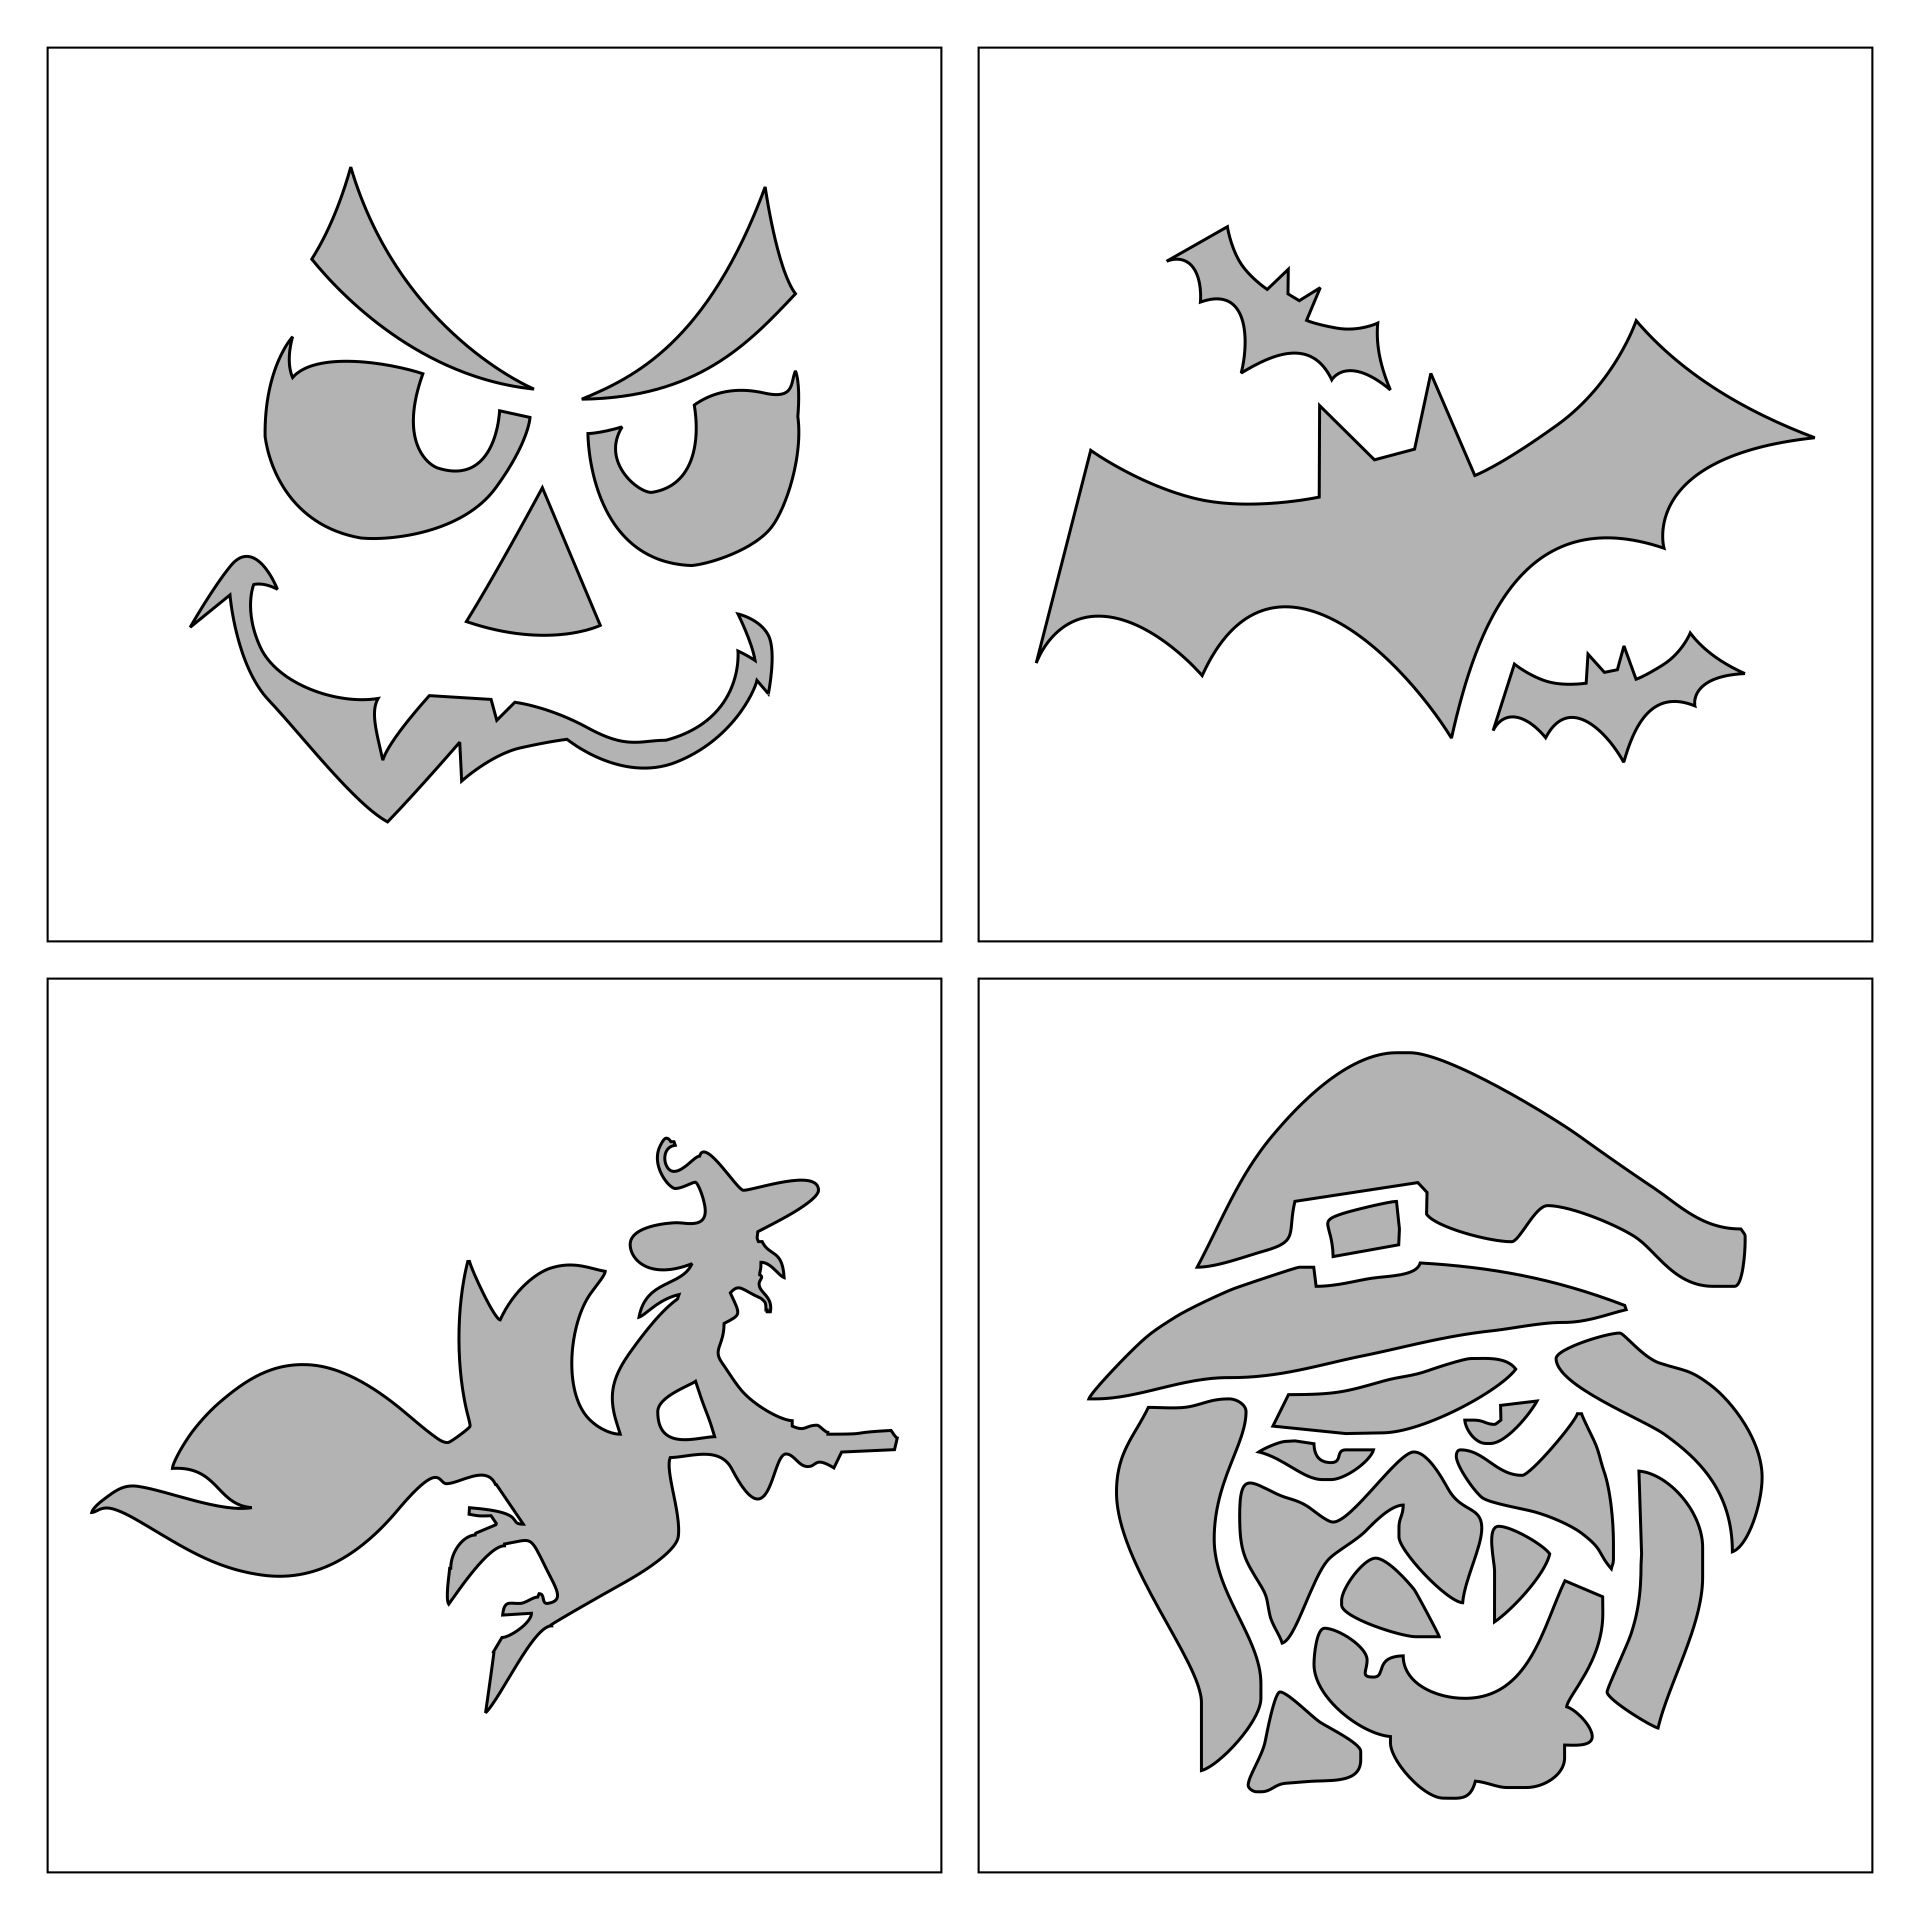 15 Best Printable Halloween Pumpkin Carving Designs PDF for Free at ...